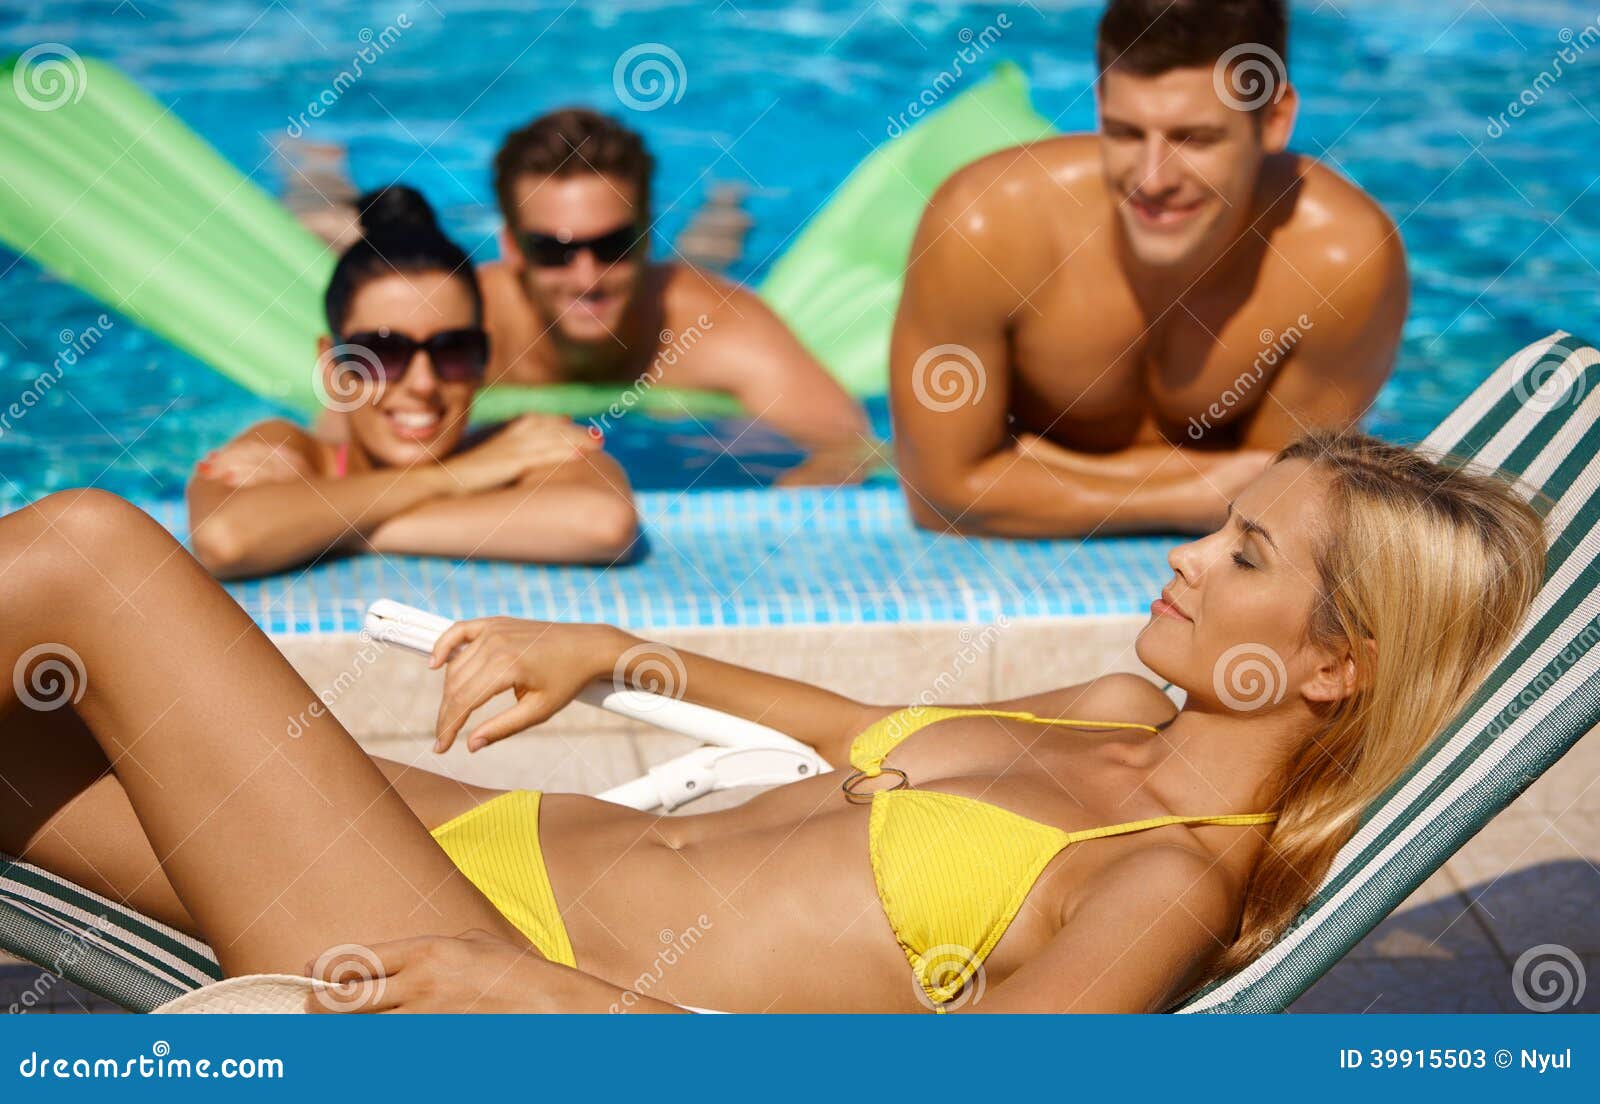 attractive female and companionship by pool